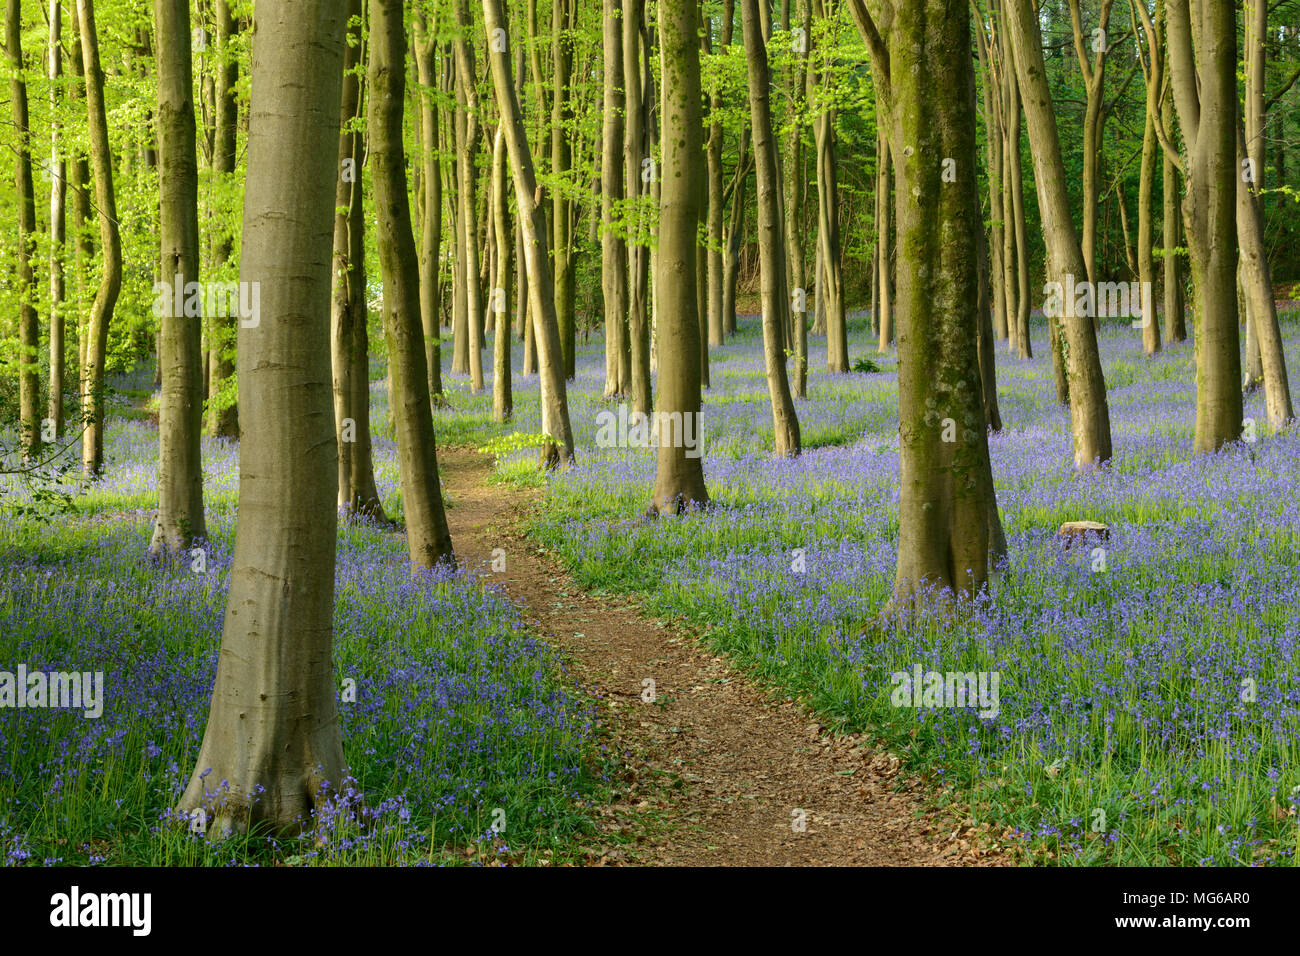 Beech woodland carpeted in Bluebells near Wrington, North Somerset. Stock Photo